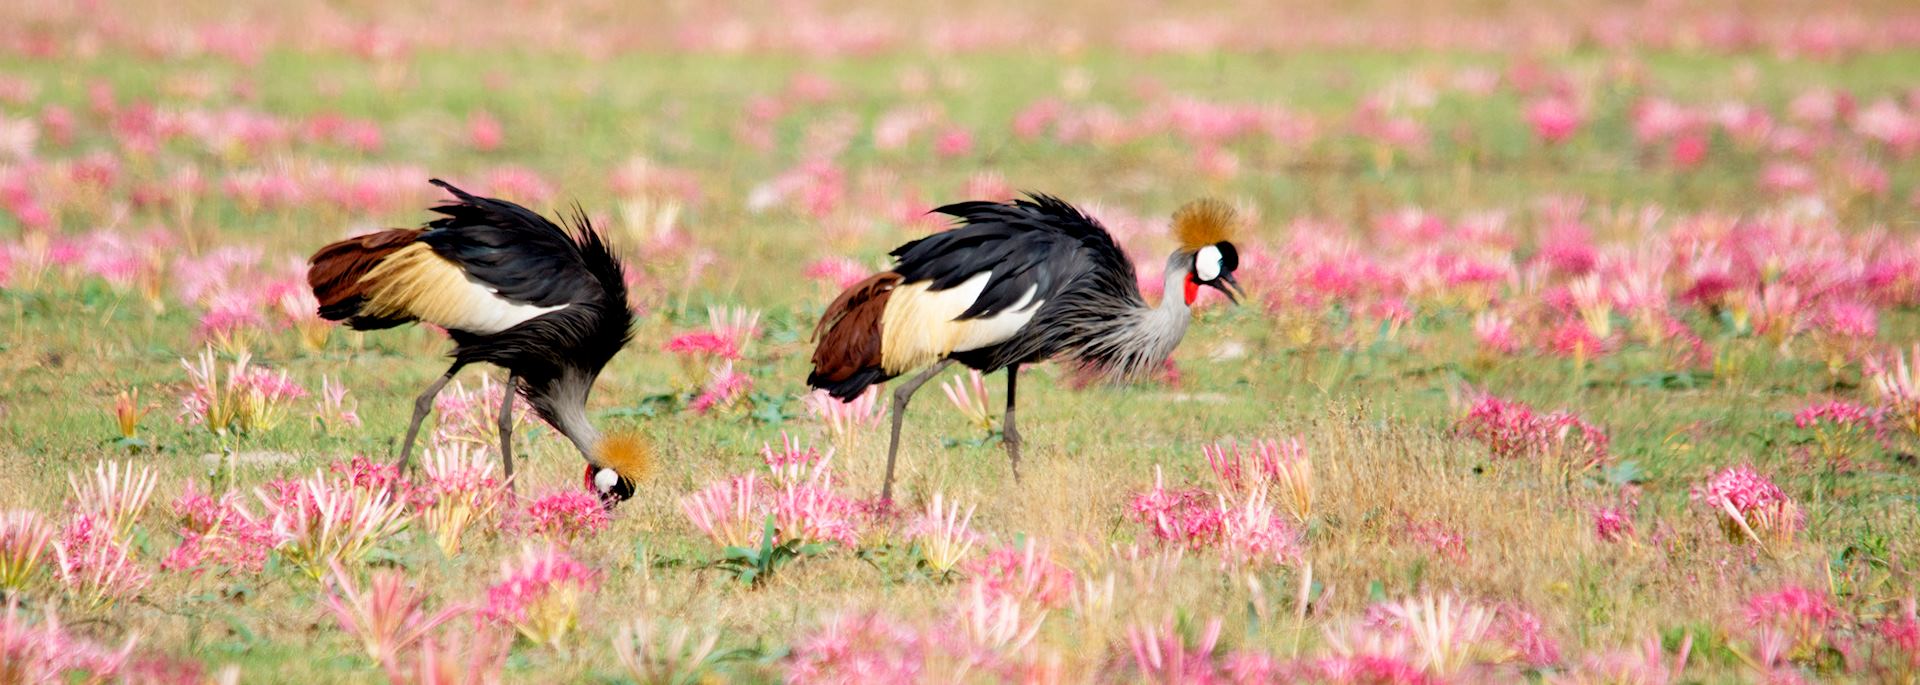 Crowned cranes in South Luangwa National Park